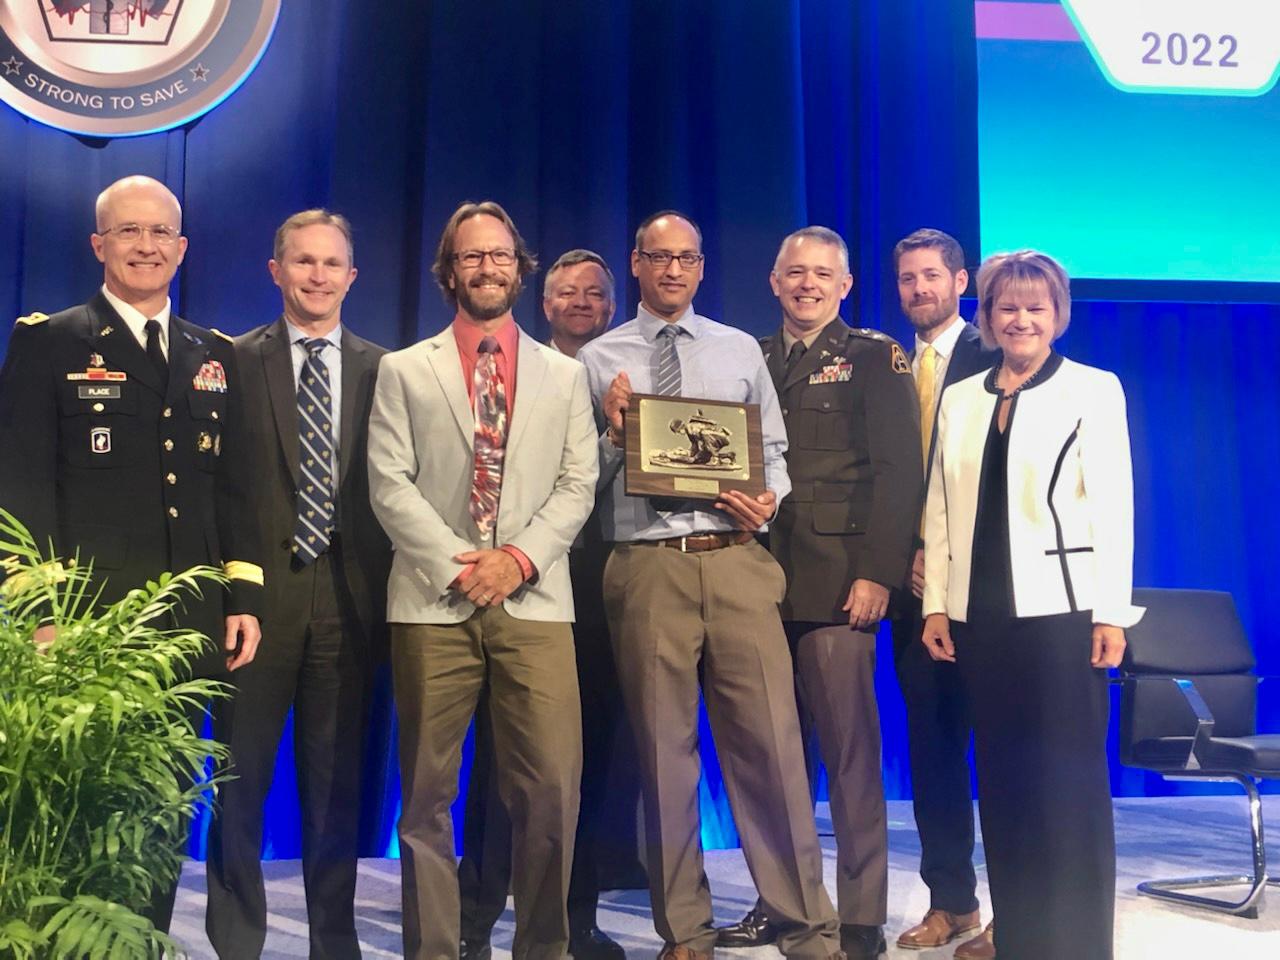 Product Rapid Opioid Countermeasure System Product Team Wins Award for Outstanding Program Management Team at 2022 Military Health System Research Symposium - Kaléo image